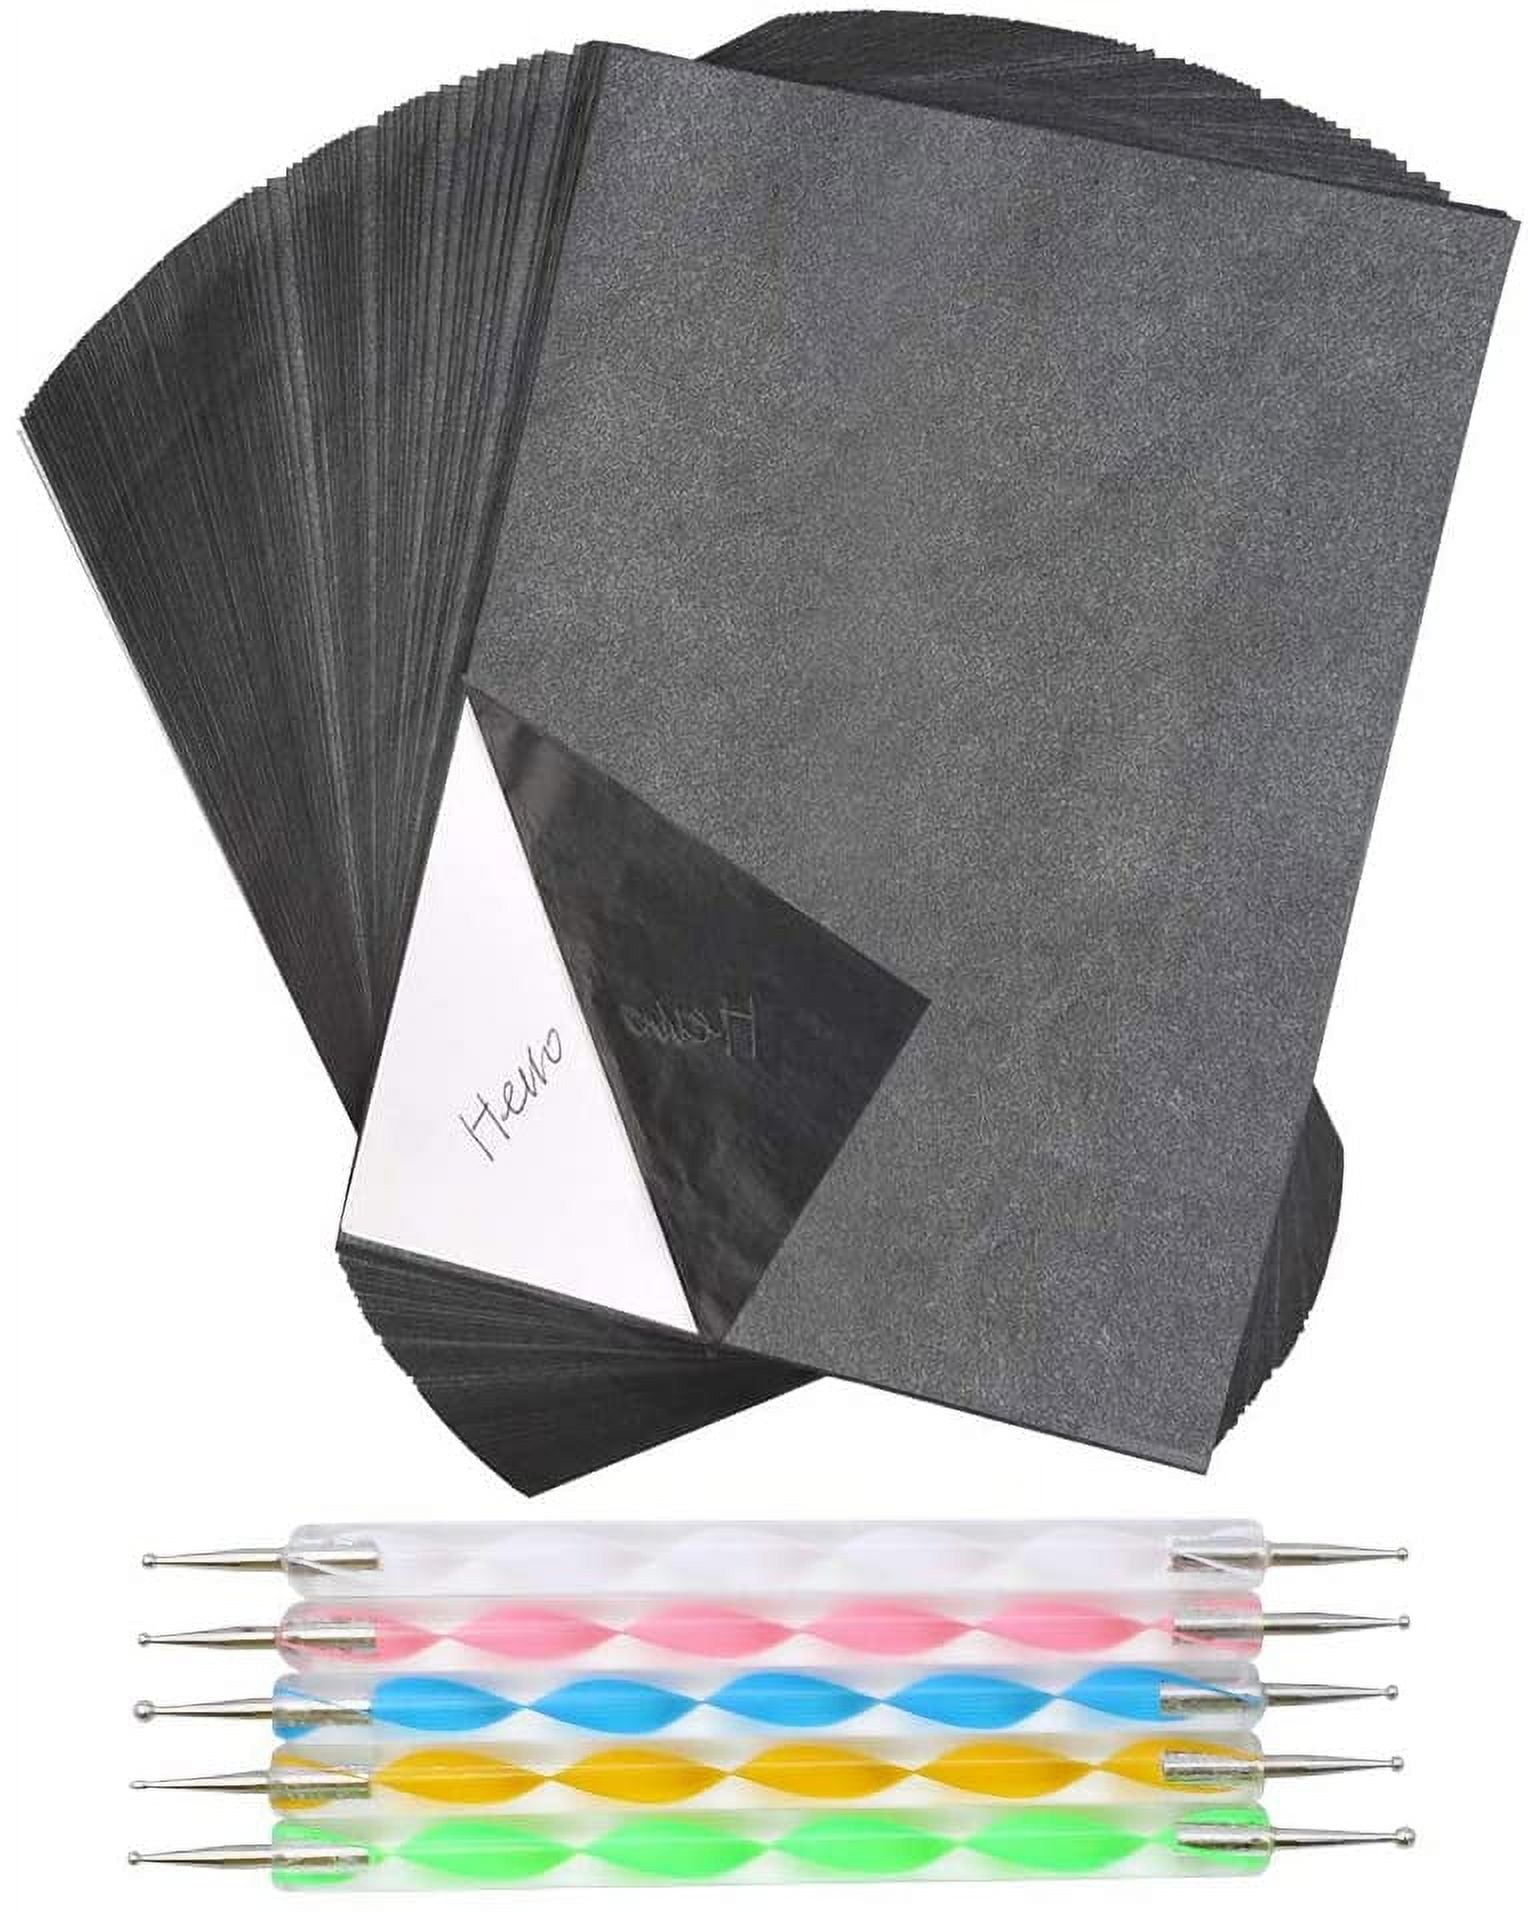 100 Sheets Black Carbon Paper for Tracing On Fabric